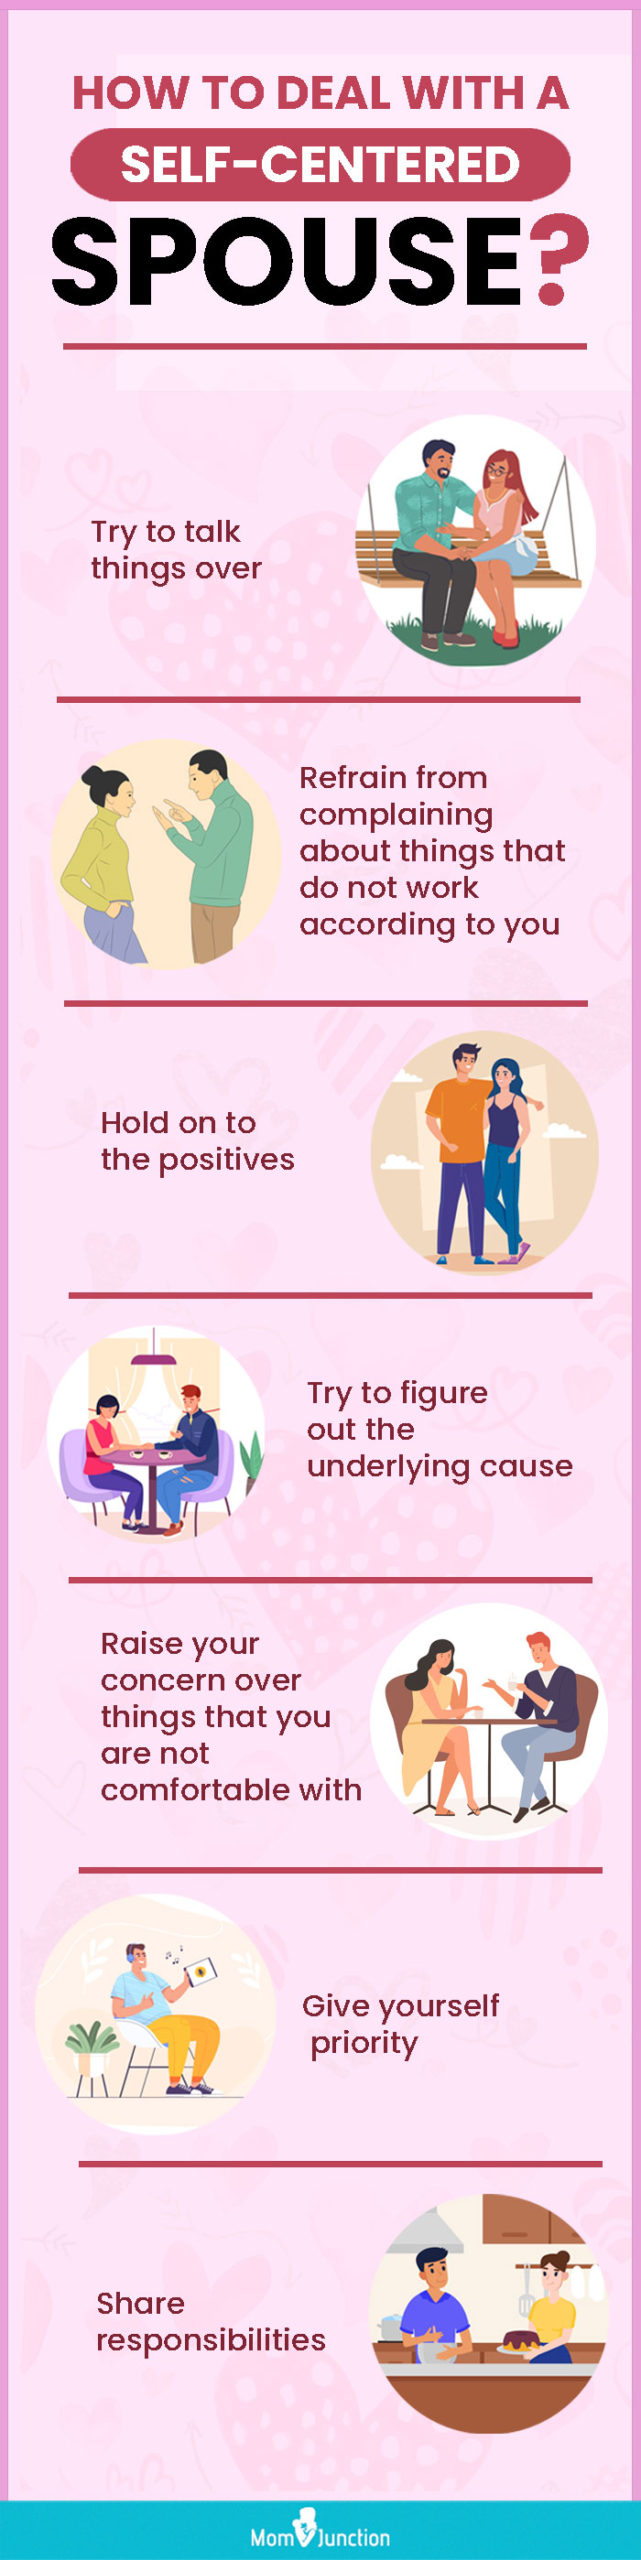 dealing with a self-centered spouse (infographic)